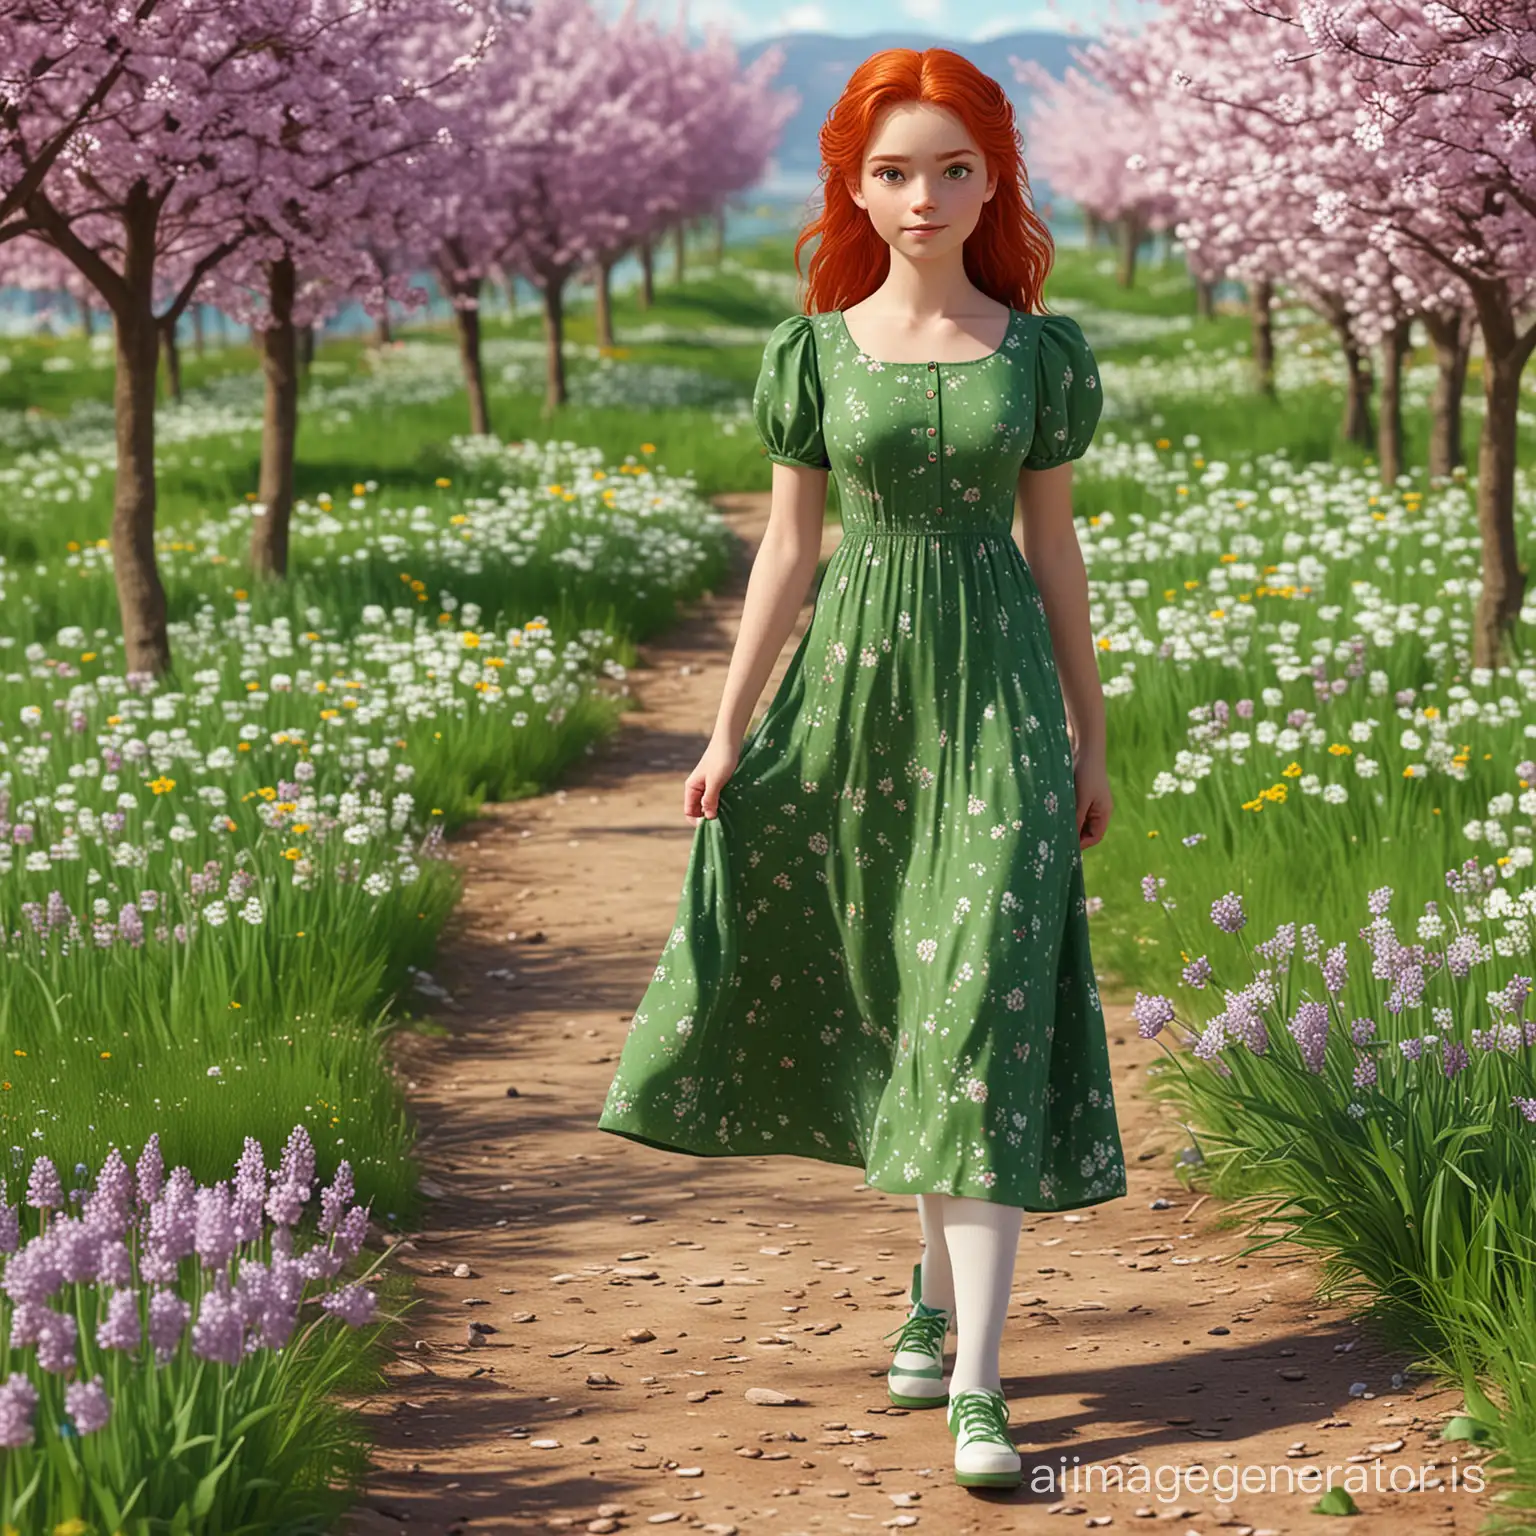 Enchanting-Spring-Landscape-Portrait-with-RedHaired-Girl-in-Green-Maxi-Dress